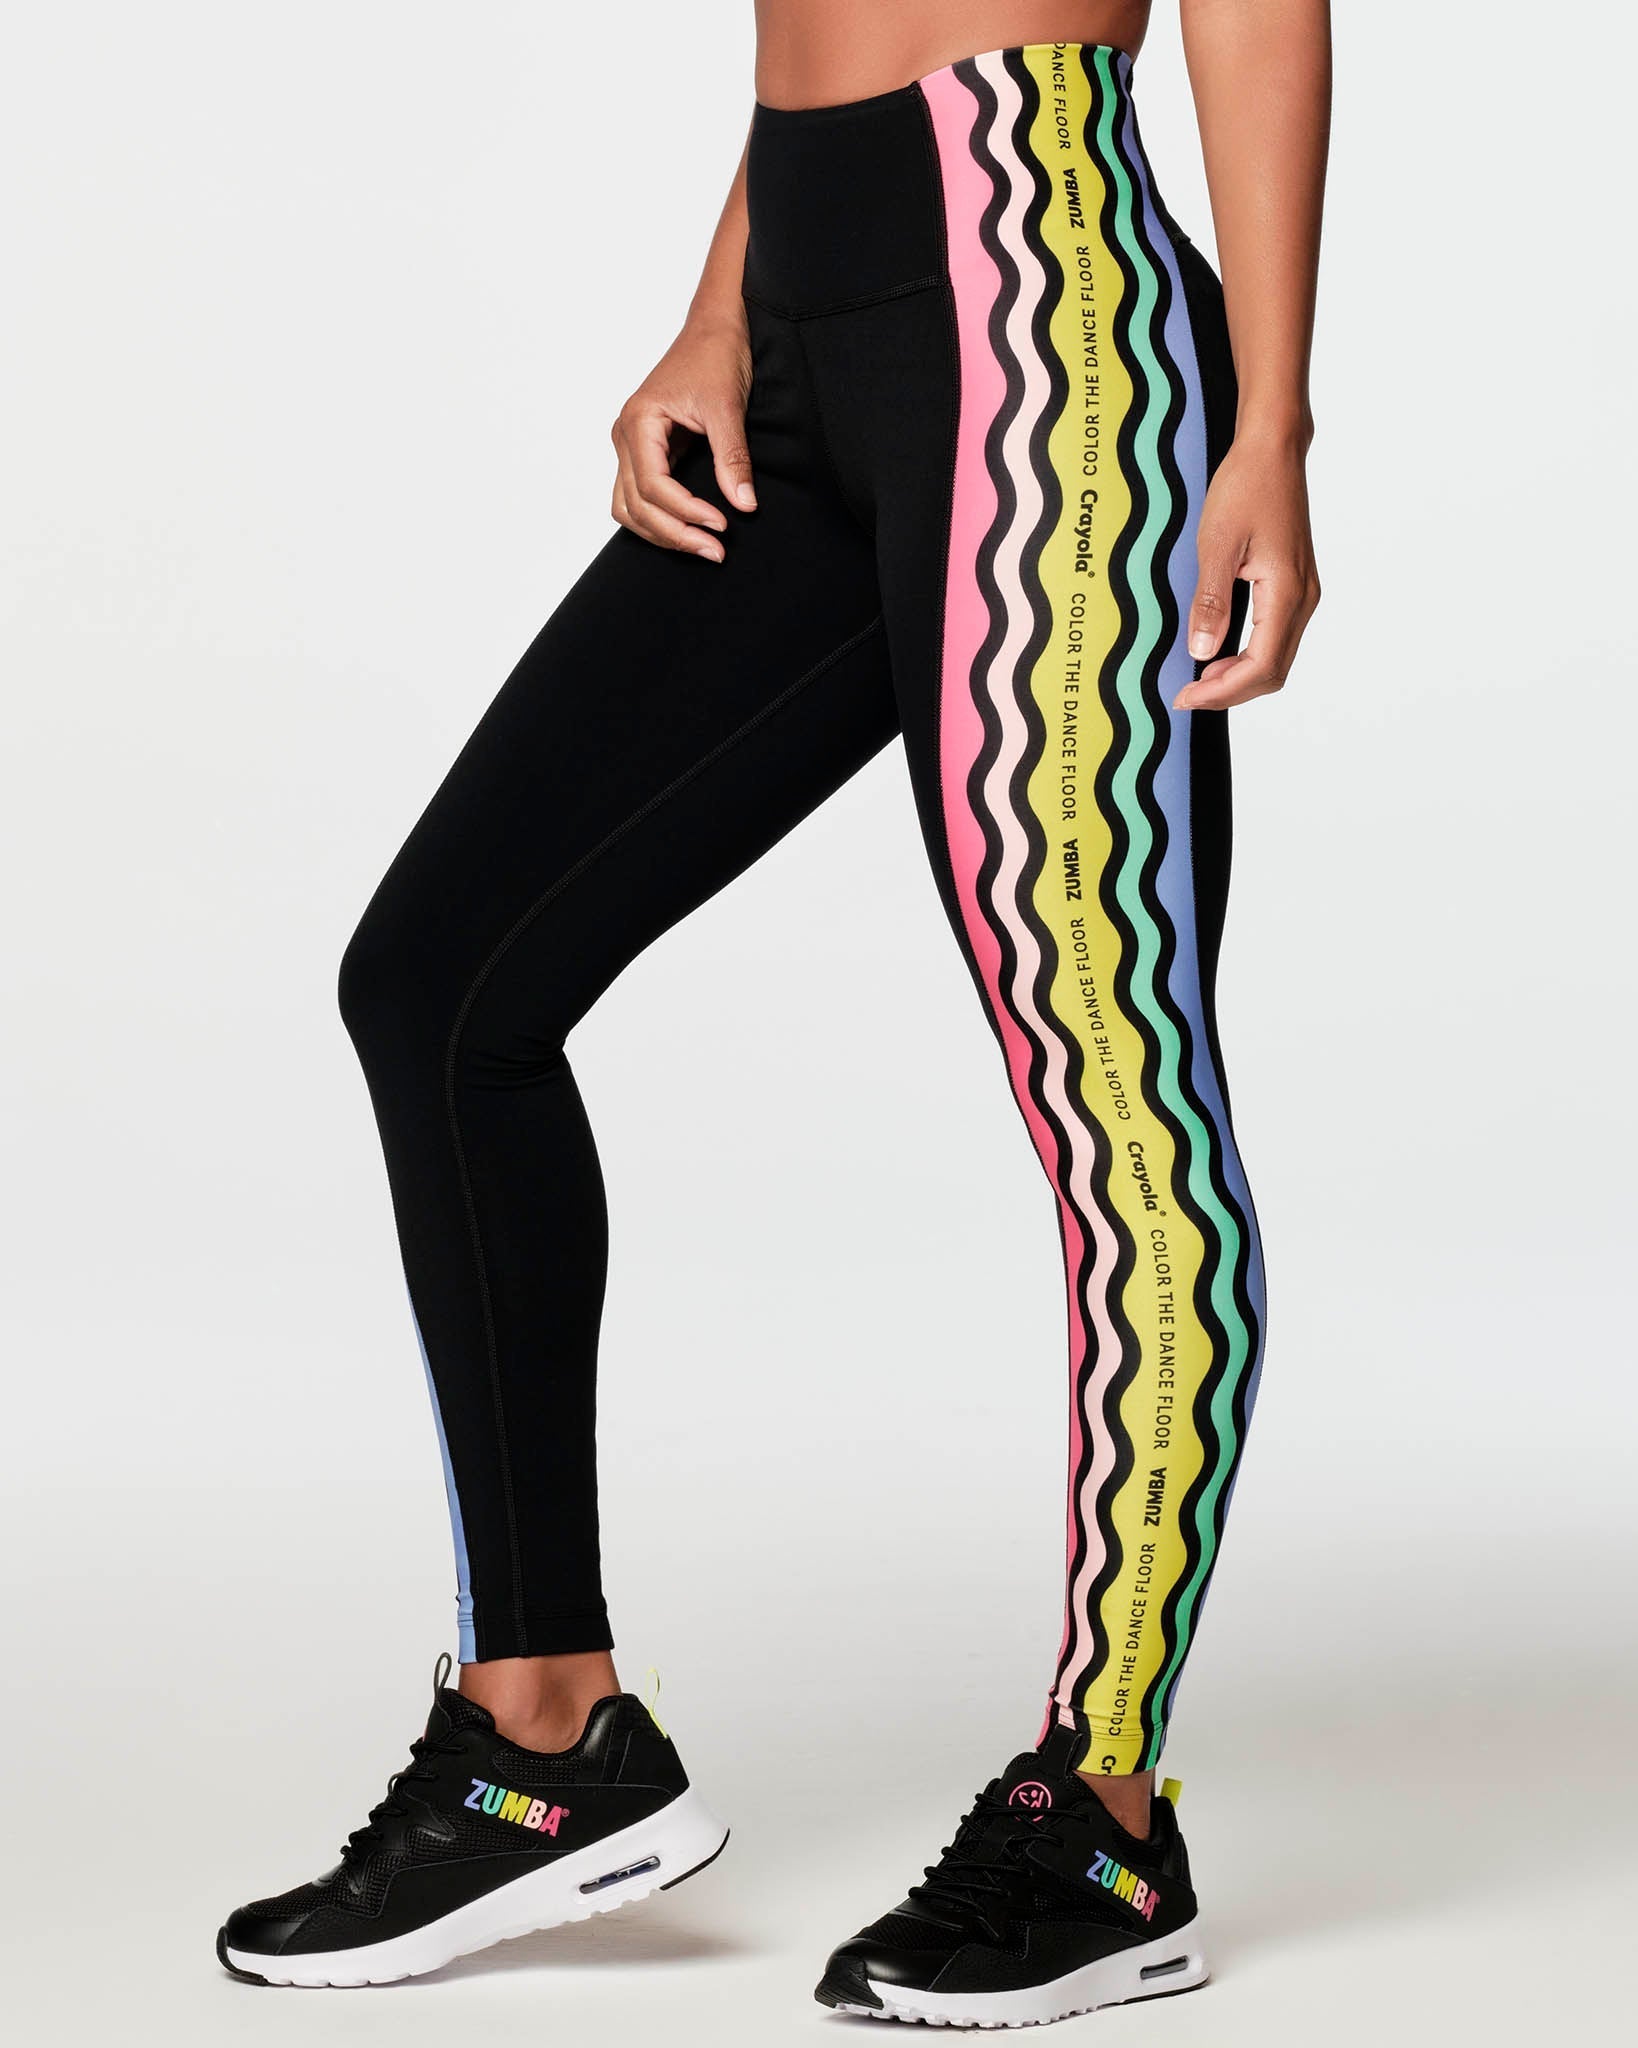 Zumba Glow With The Flow High Waisted Ankle Leggings - Black